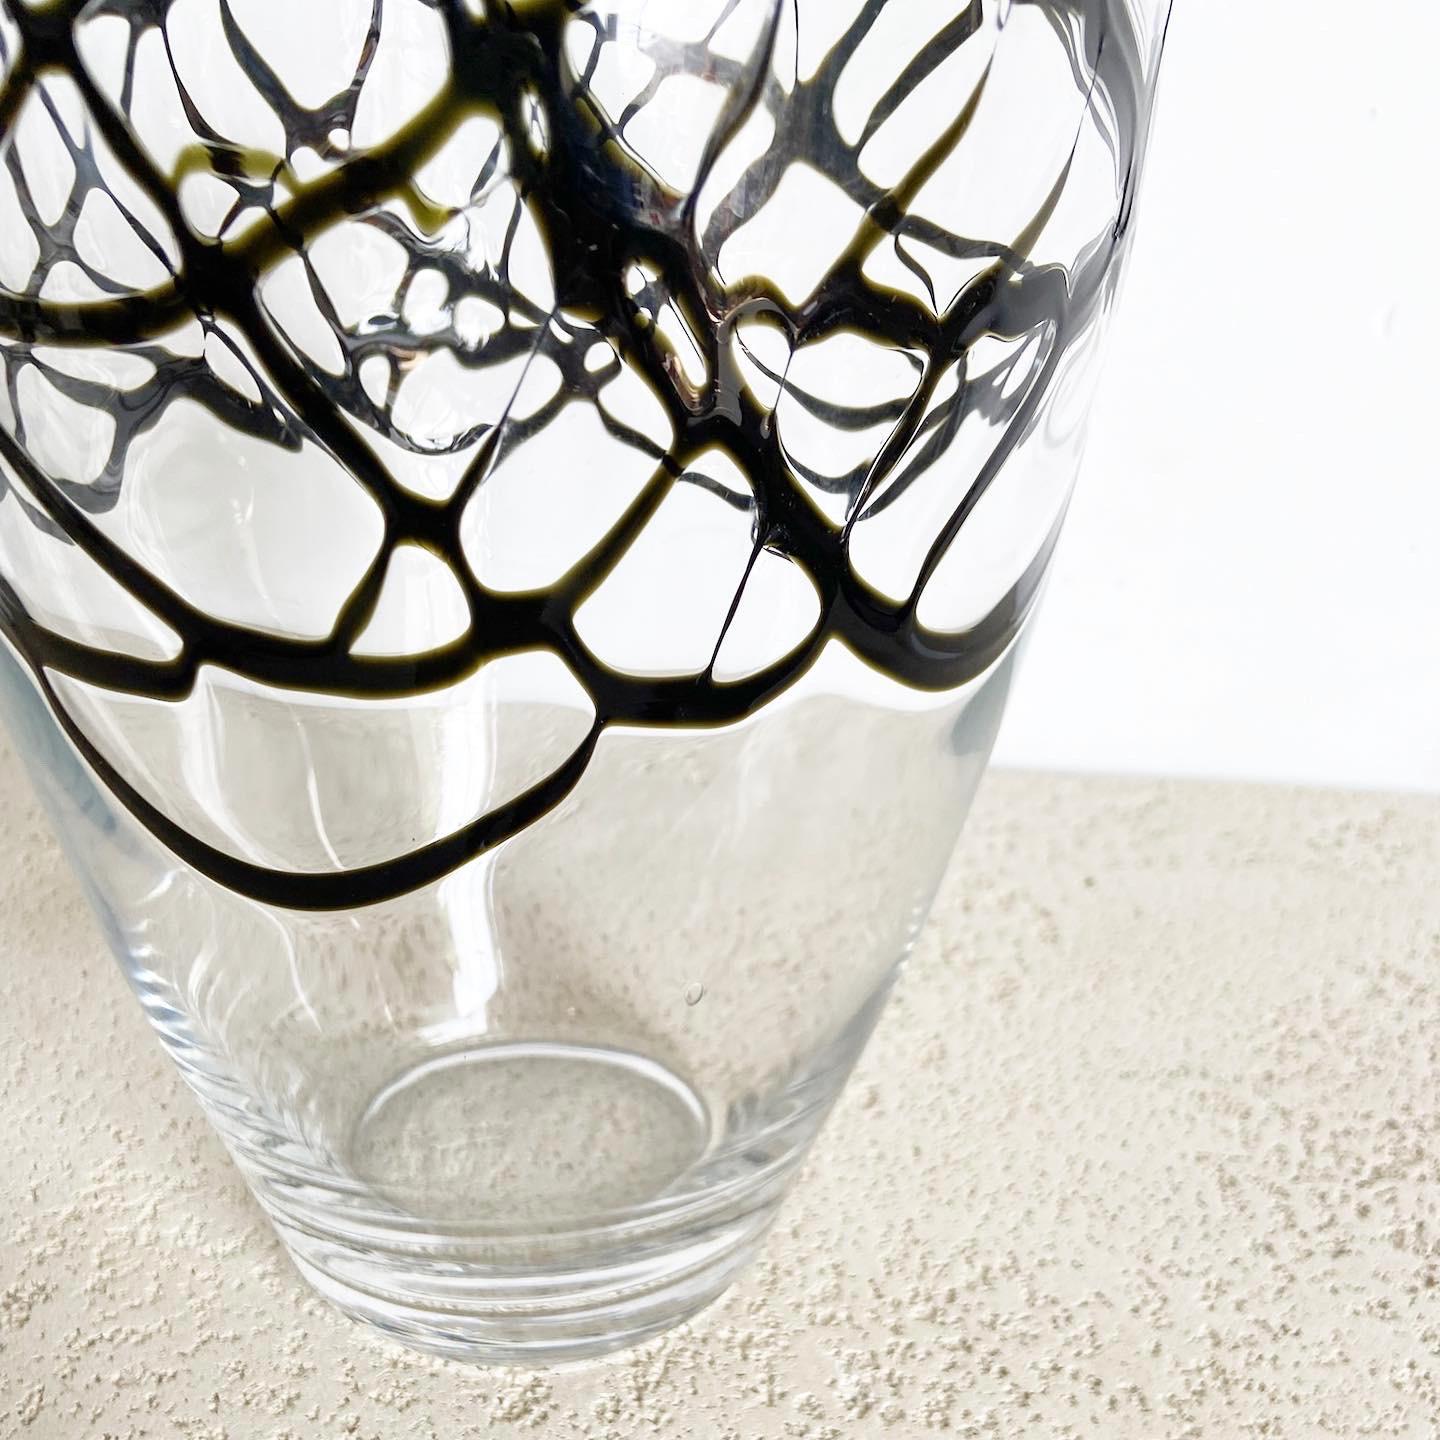 This Postmodern Abstract Glass Vase is a stunning blend of avant-garde design and high-quality craftsmanship. Made from hand-blown glass, its irregular shape defies traditional symmetry, making it a dynamic focal point for any interior. The